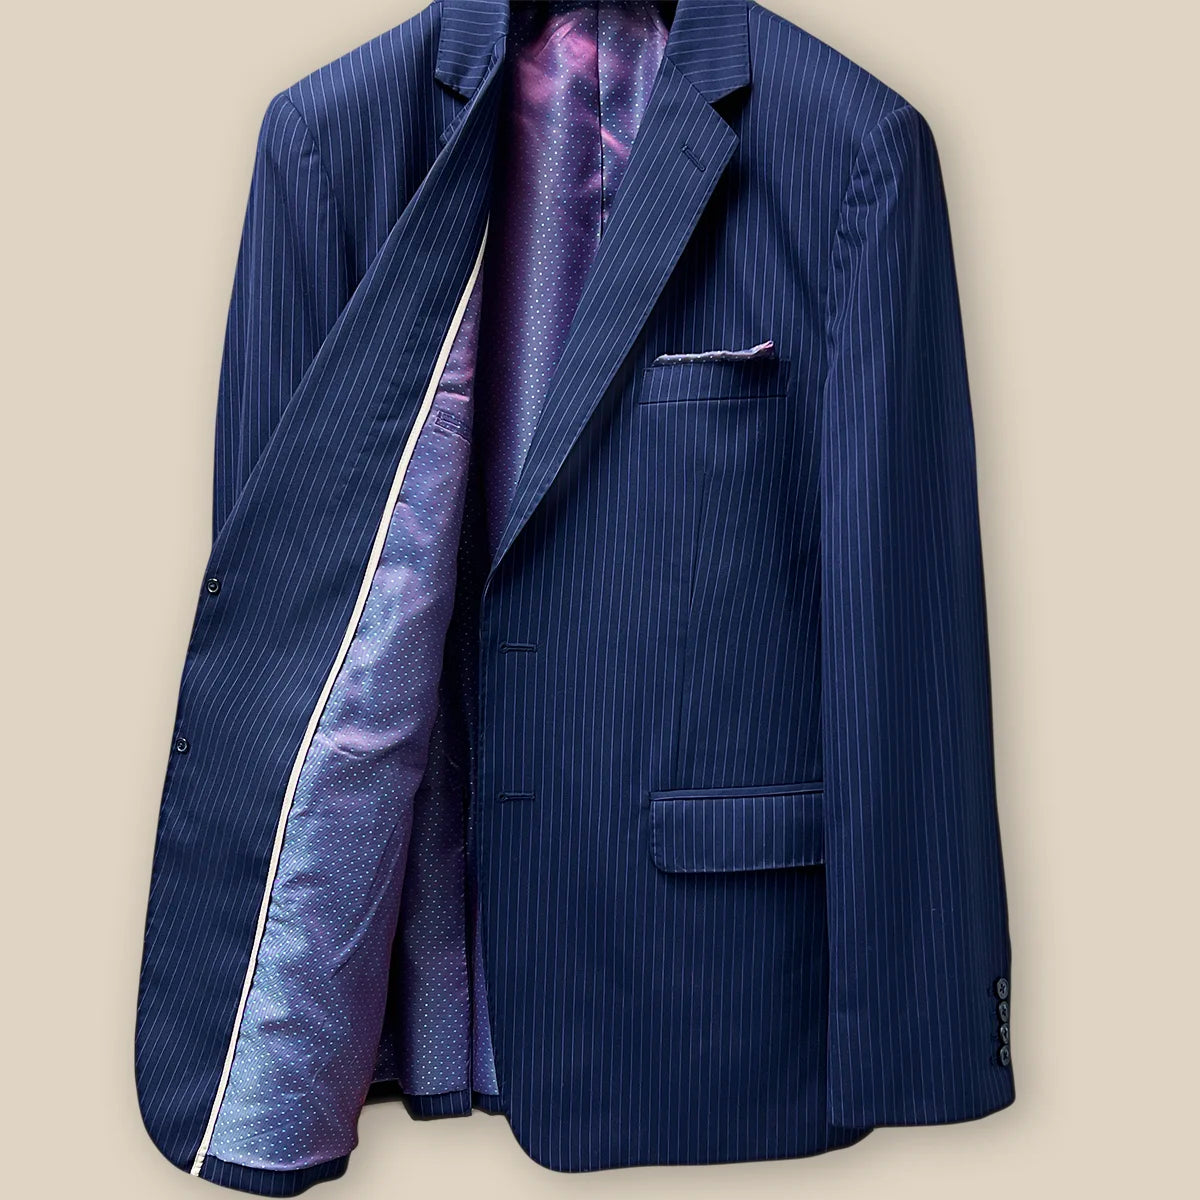 Inside right view of a navy suit with purple pinstripes, showcasing the inner lining and construction.